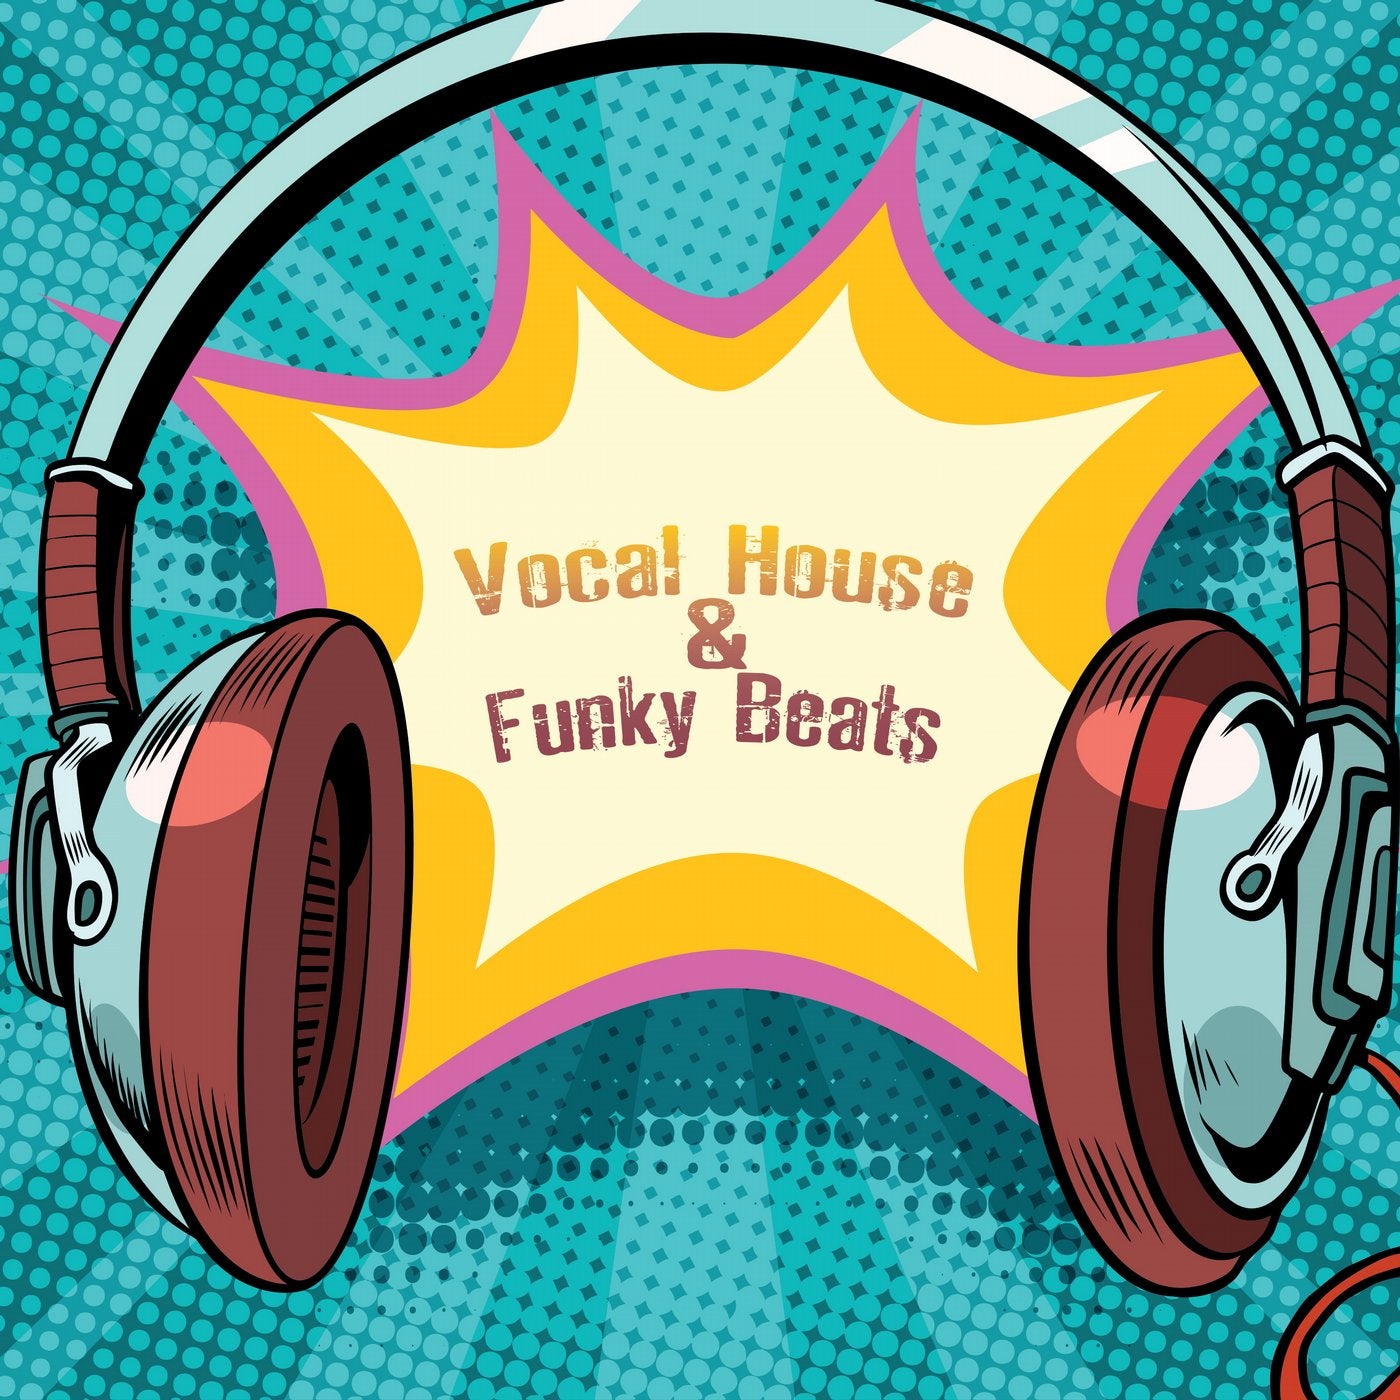 Vocal House & Funky Beats